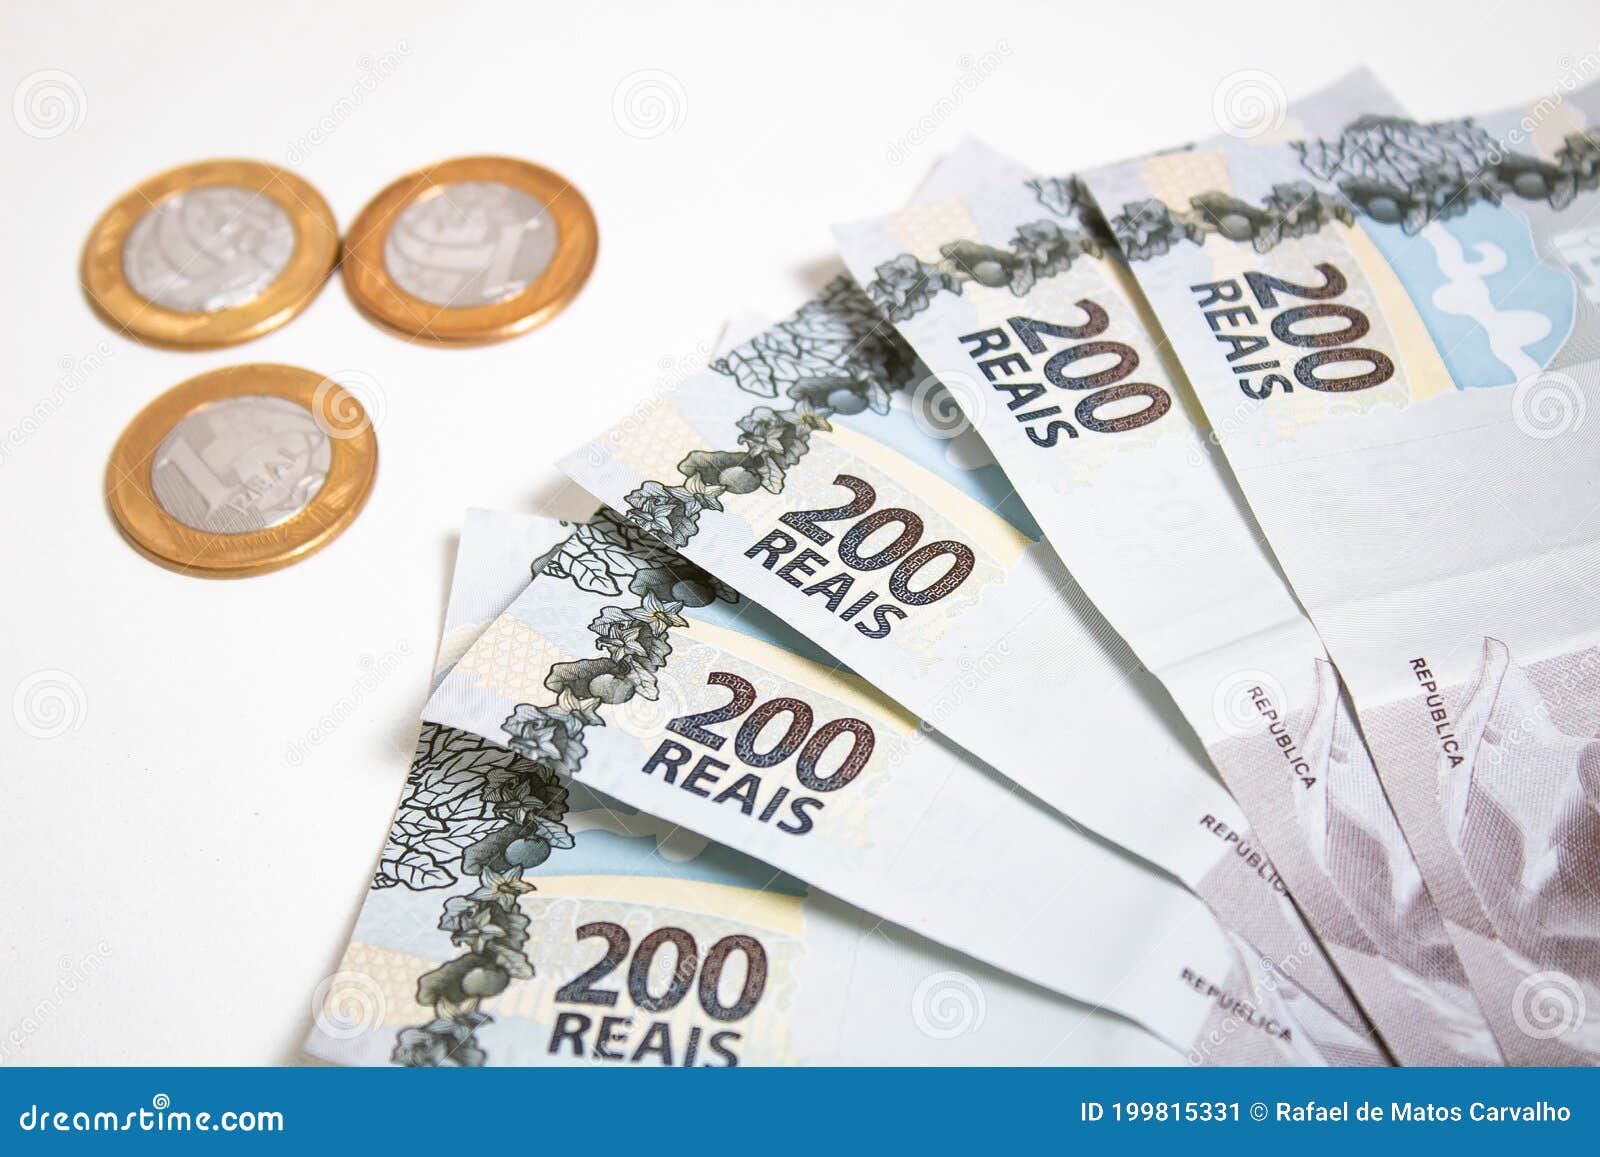 real currency. dinheiro, brasil, reais. banknotes of 200 reais.